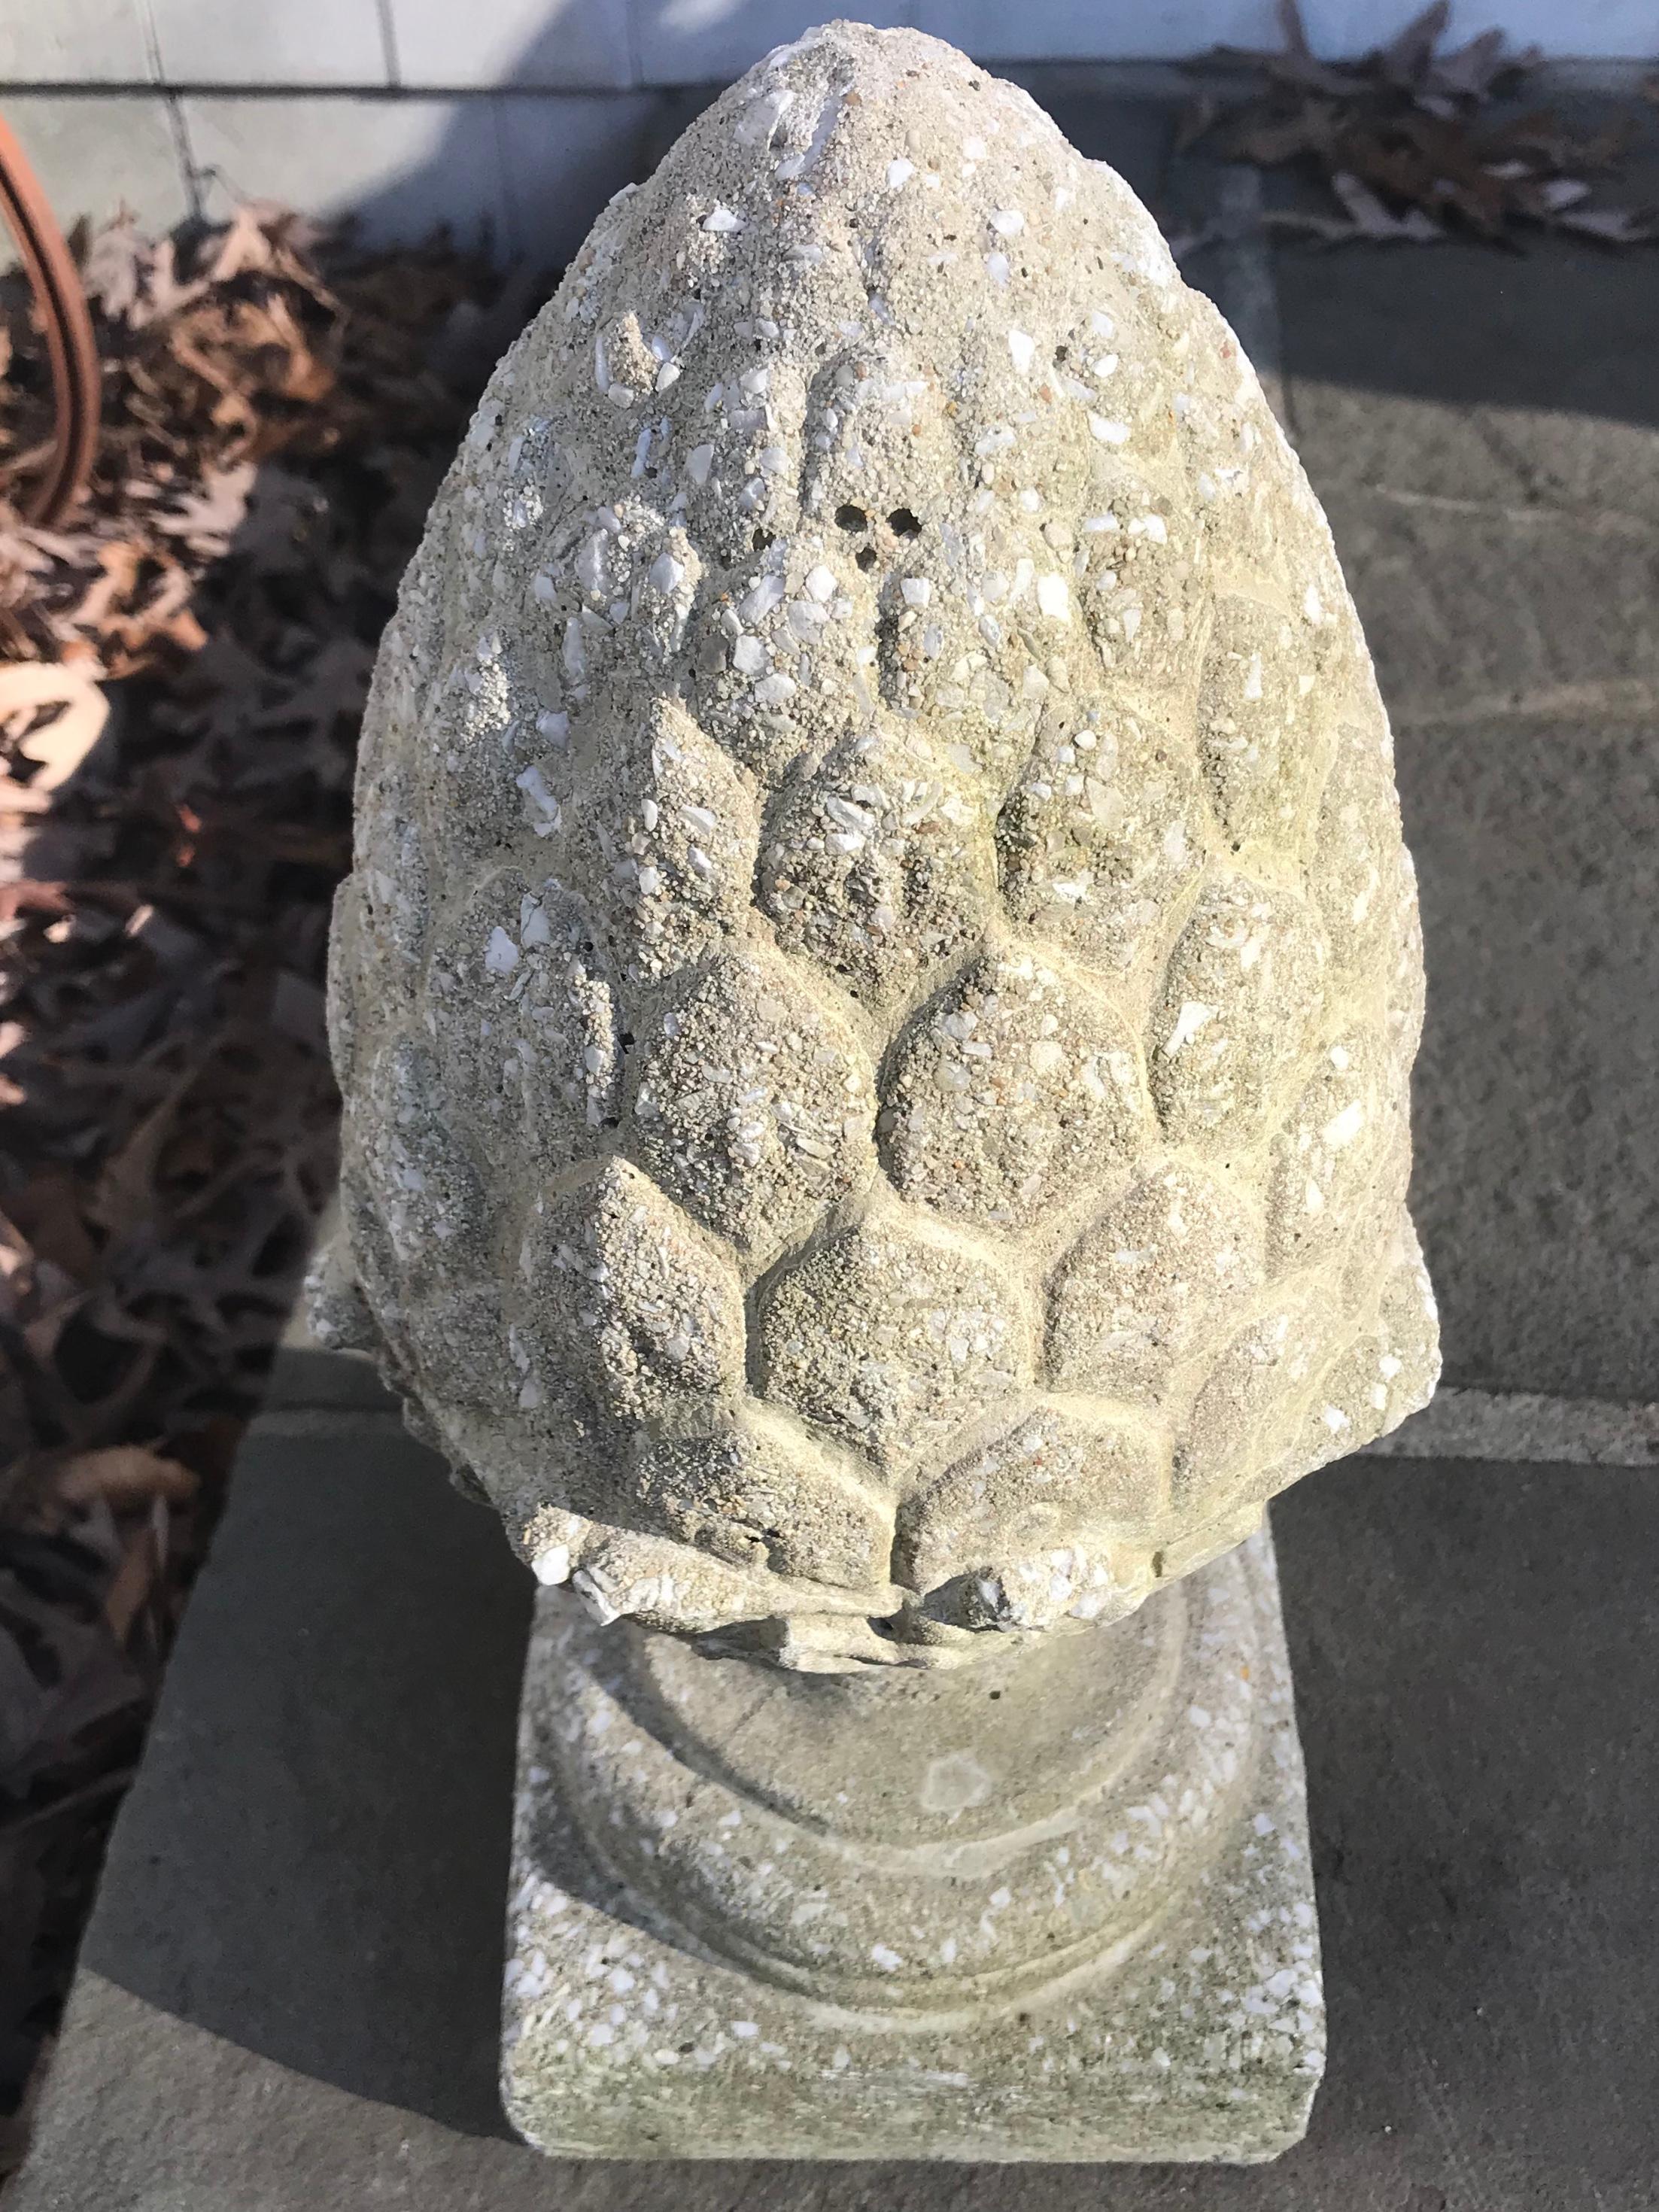 Pinecone cast stone finial. Vintage cast stone garden ornament finial in the form of an inverted pinecone or pineapple on socle base. Some small losses to out-turned leaves above base, otherwise in great vintage condition, United States,